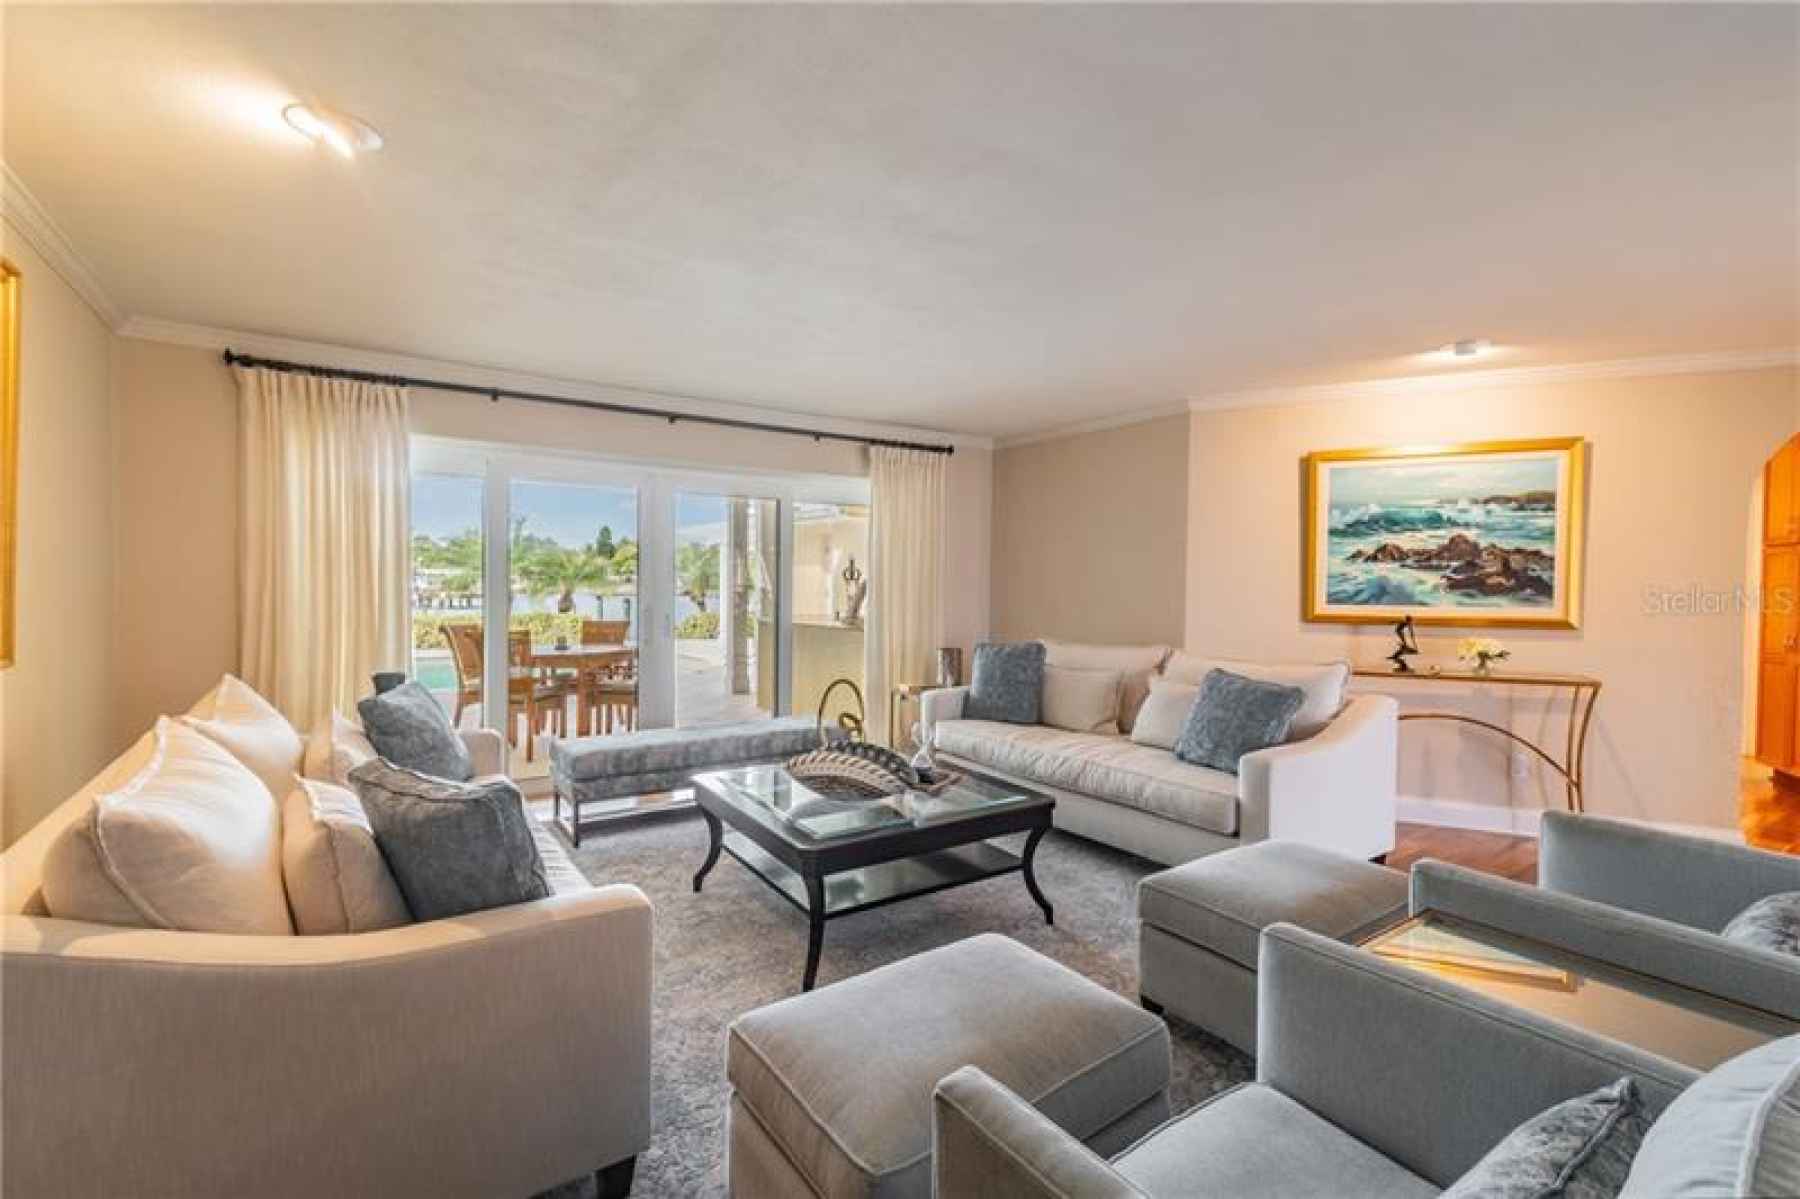 Living room overlooks lanai and waterfront.